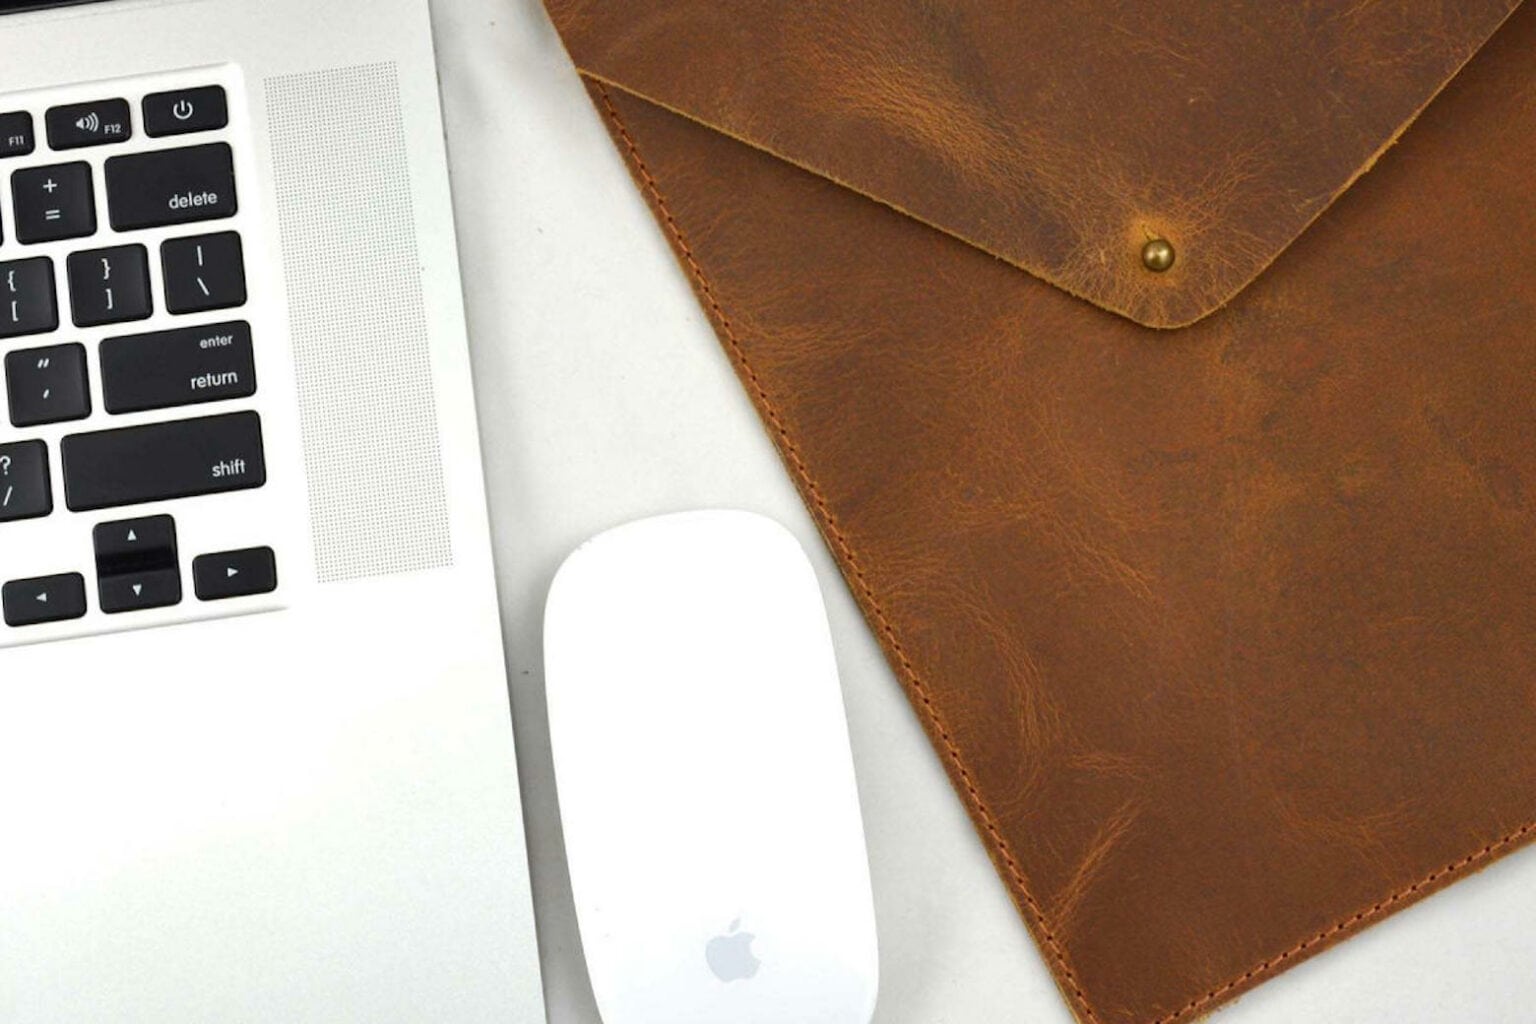 This leather sleeve offers luxe MacBook protection.